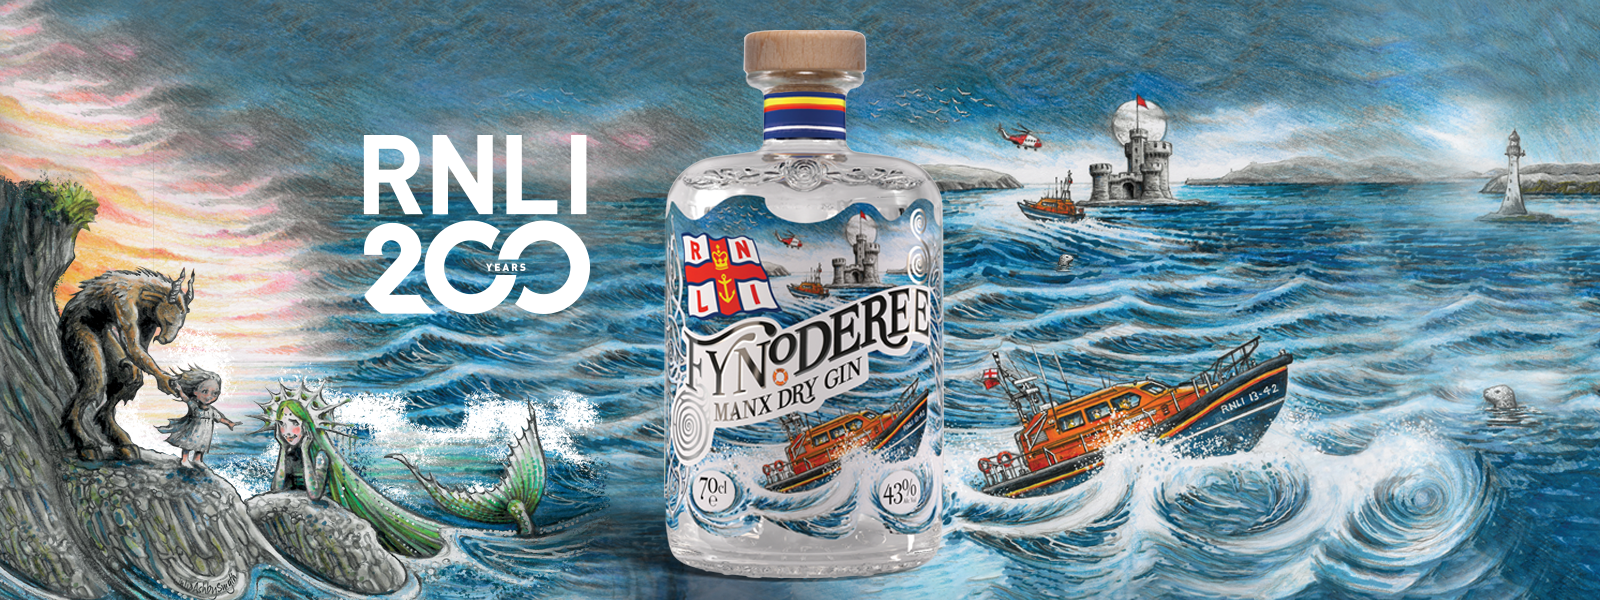 Introducing Fynoderee Manx Dry Gin – RNLI Edition: Celebrating 200 years of the RNLI